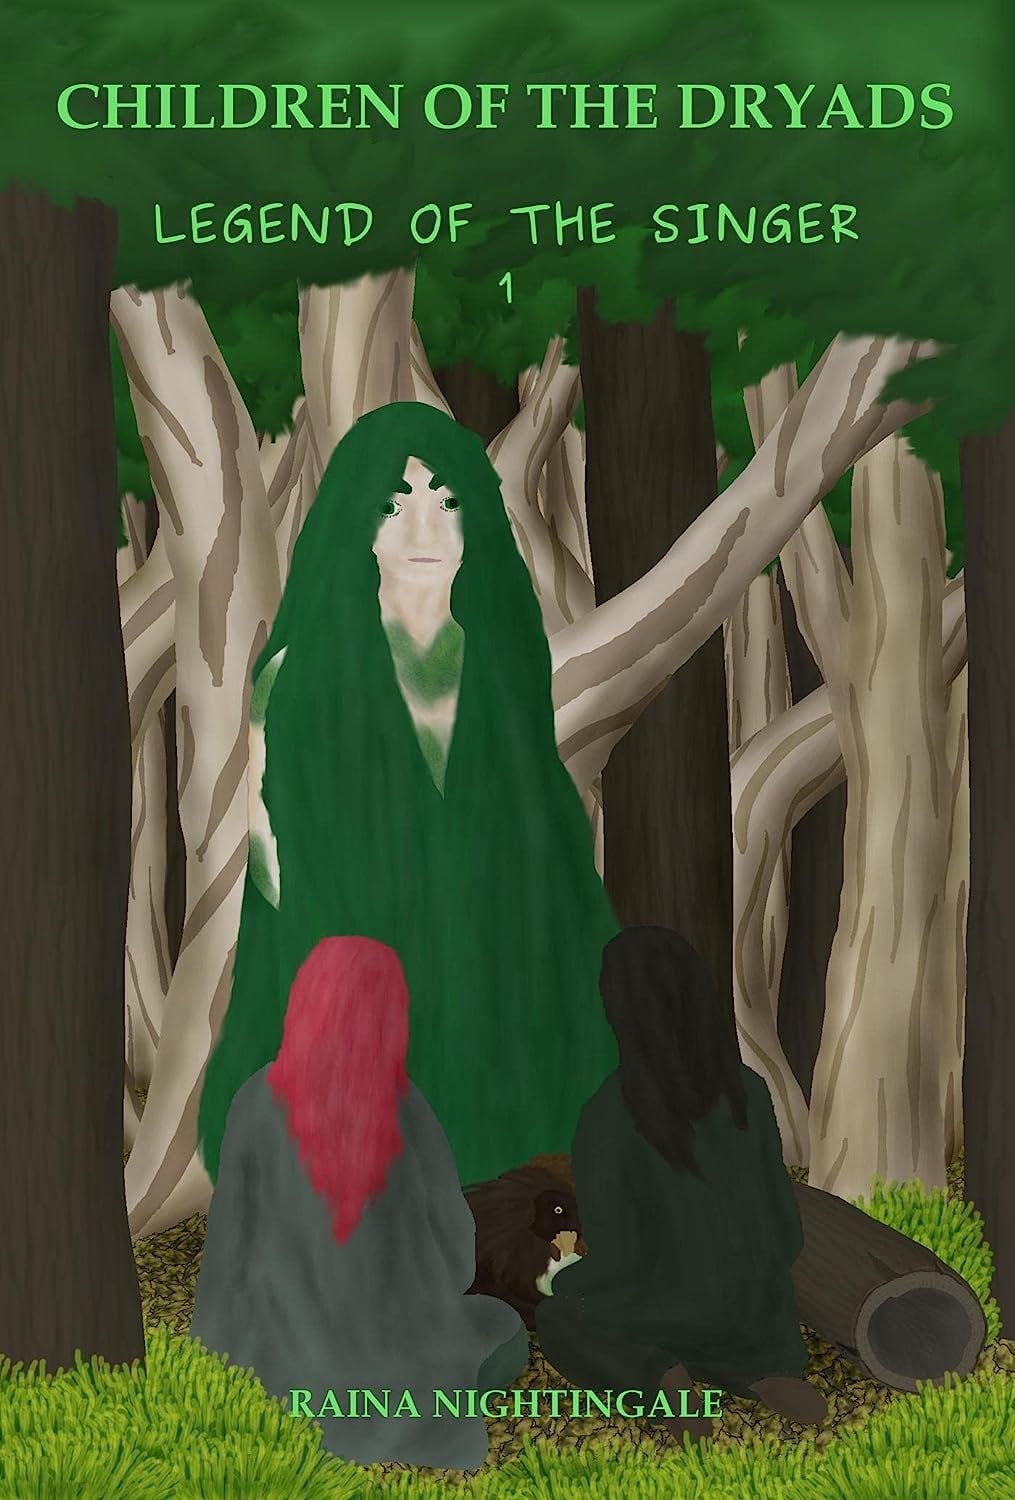 Children of the Dryads, showing elf-like figures in a forest.